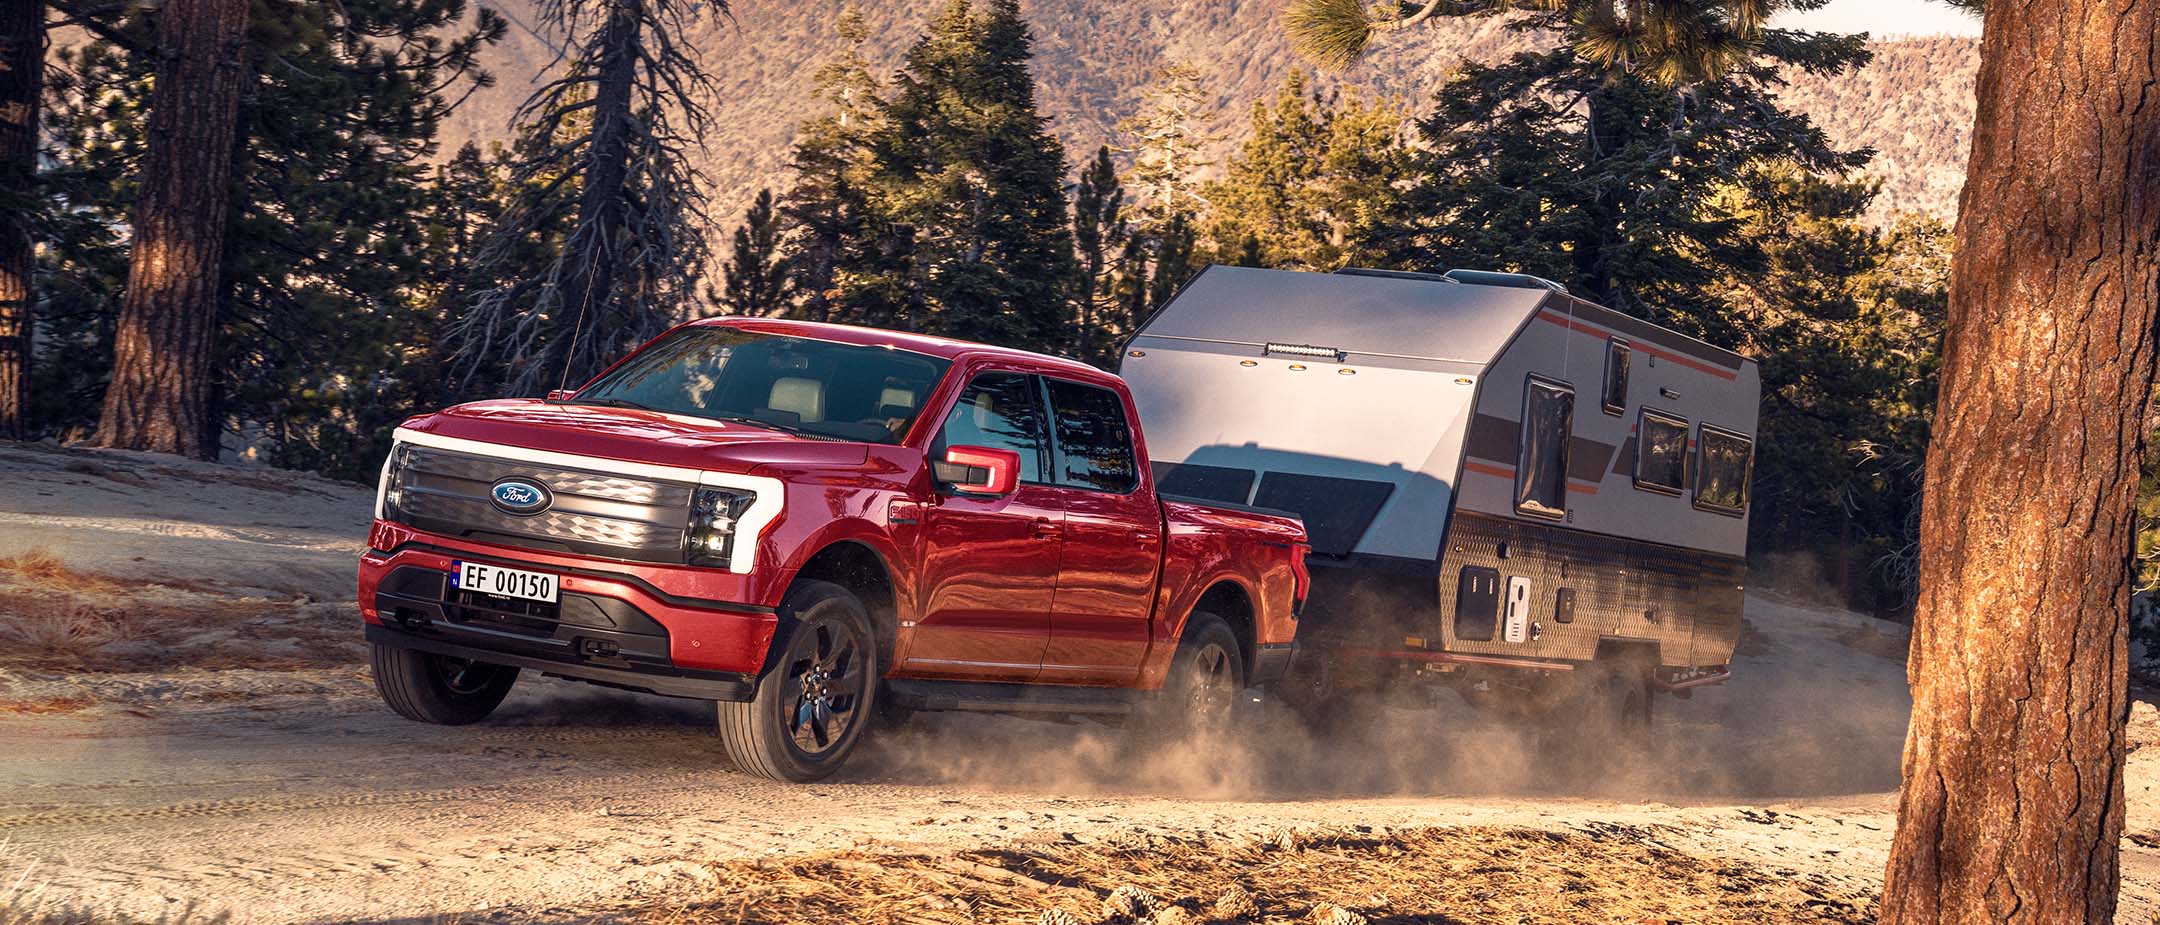 Ford F-150 Lightning towing caravan in a wild.